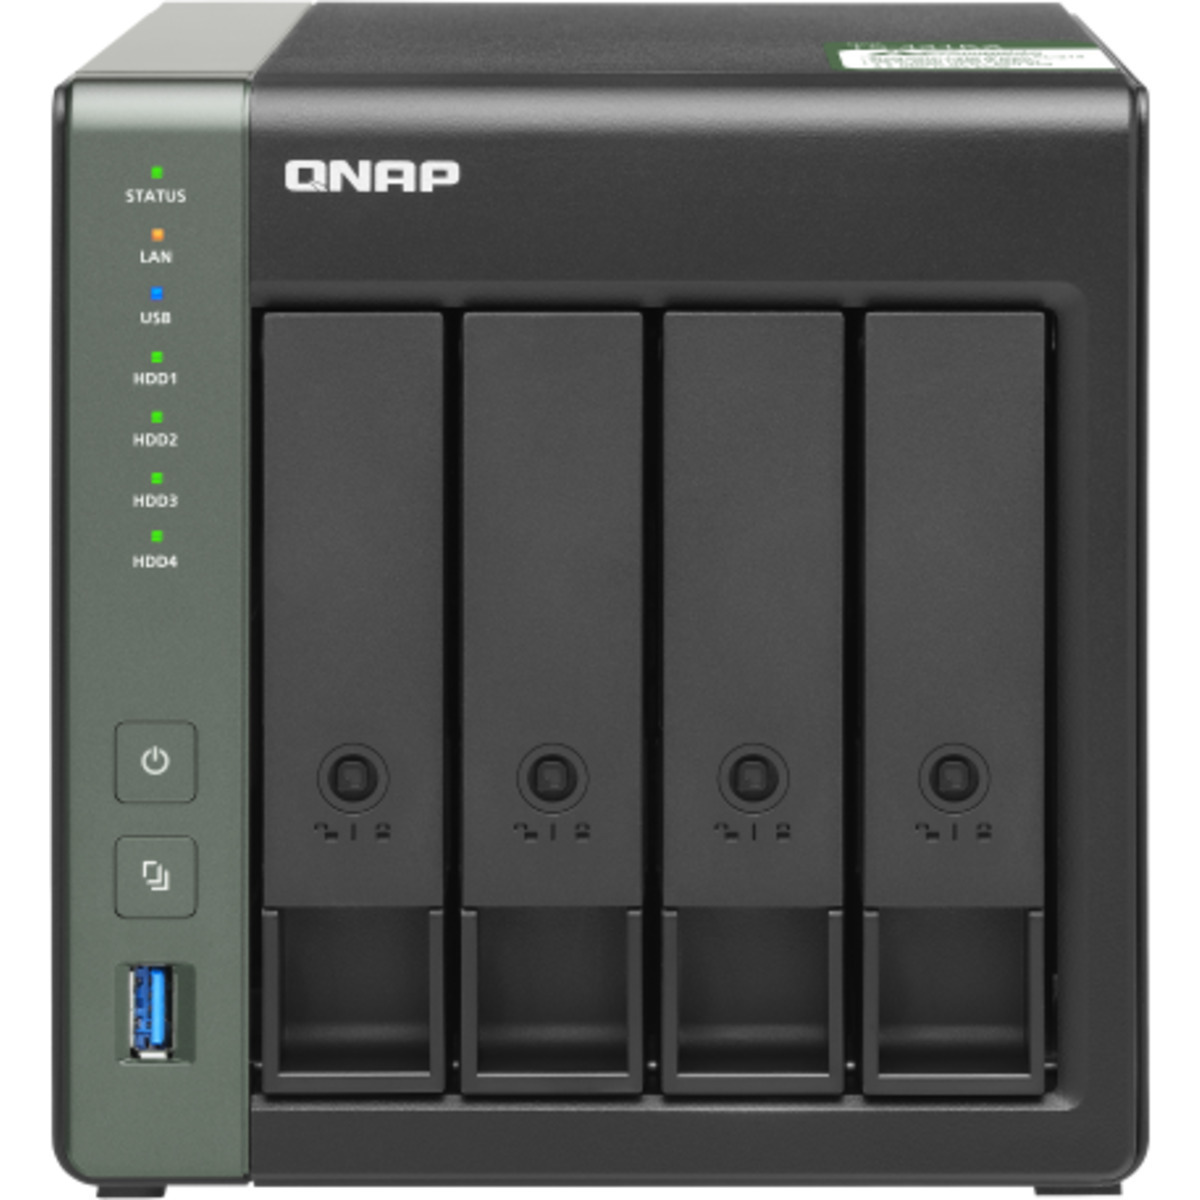 buy QNAP TS-431KX 16tb Desktop NAS - Network Attached Storage Device 4x4000gb Seagate BarraCuda ST4000DM004 3.5 7200rpm SATA 6Gb/s HDD CONSUMER Class Drives Installed - Burn-In Tested - ON SALE - FREE RAM UPGRADE - nas headquarters buy network attached storage server device das new raid-5 free shipping simply usa TS-431KX